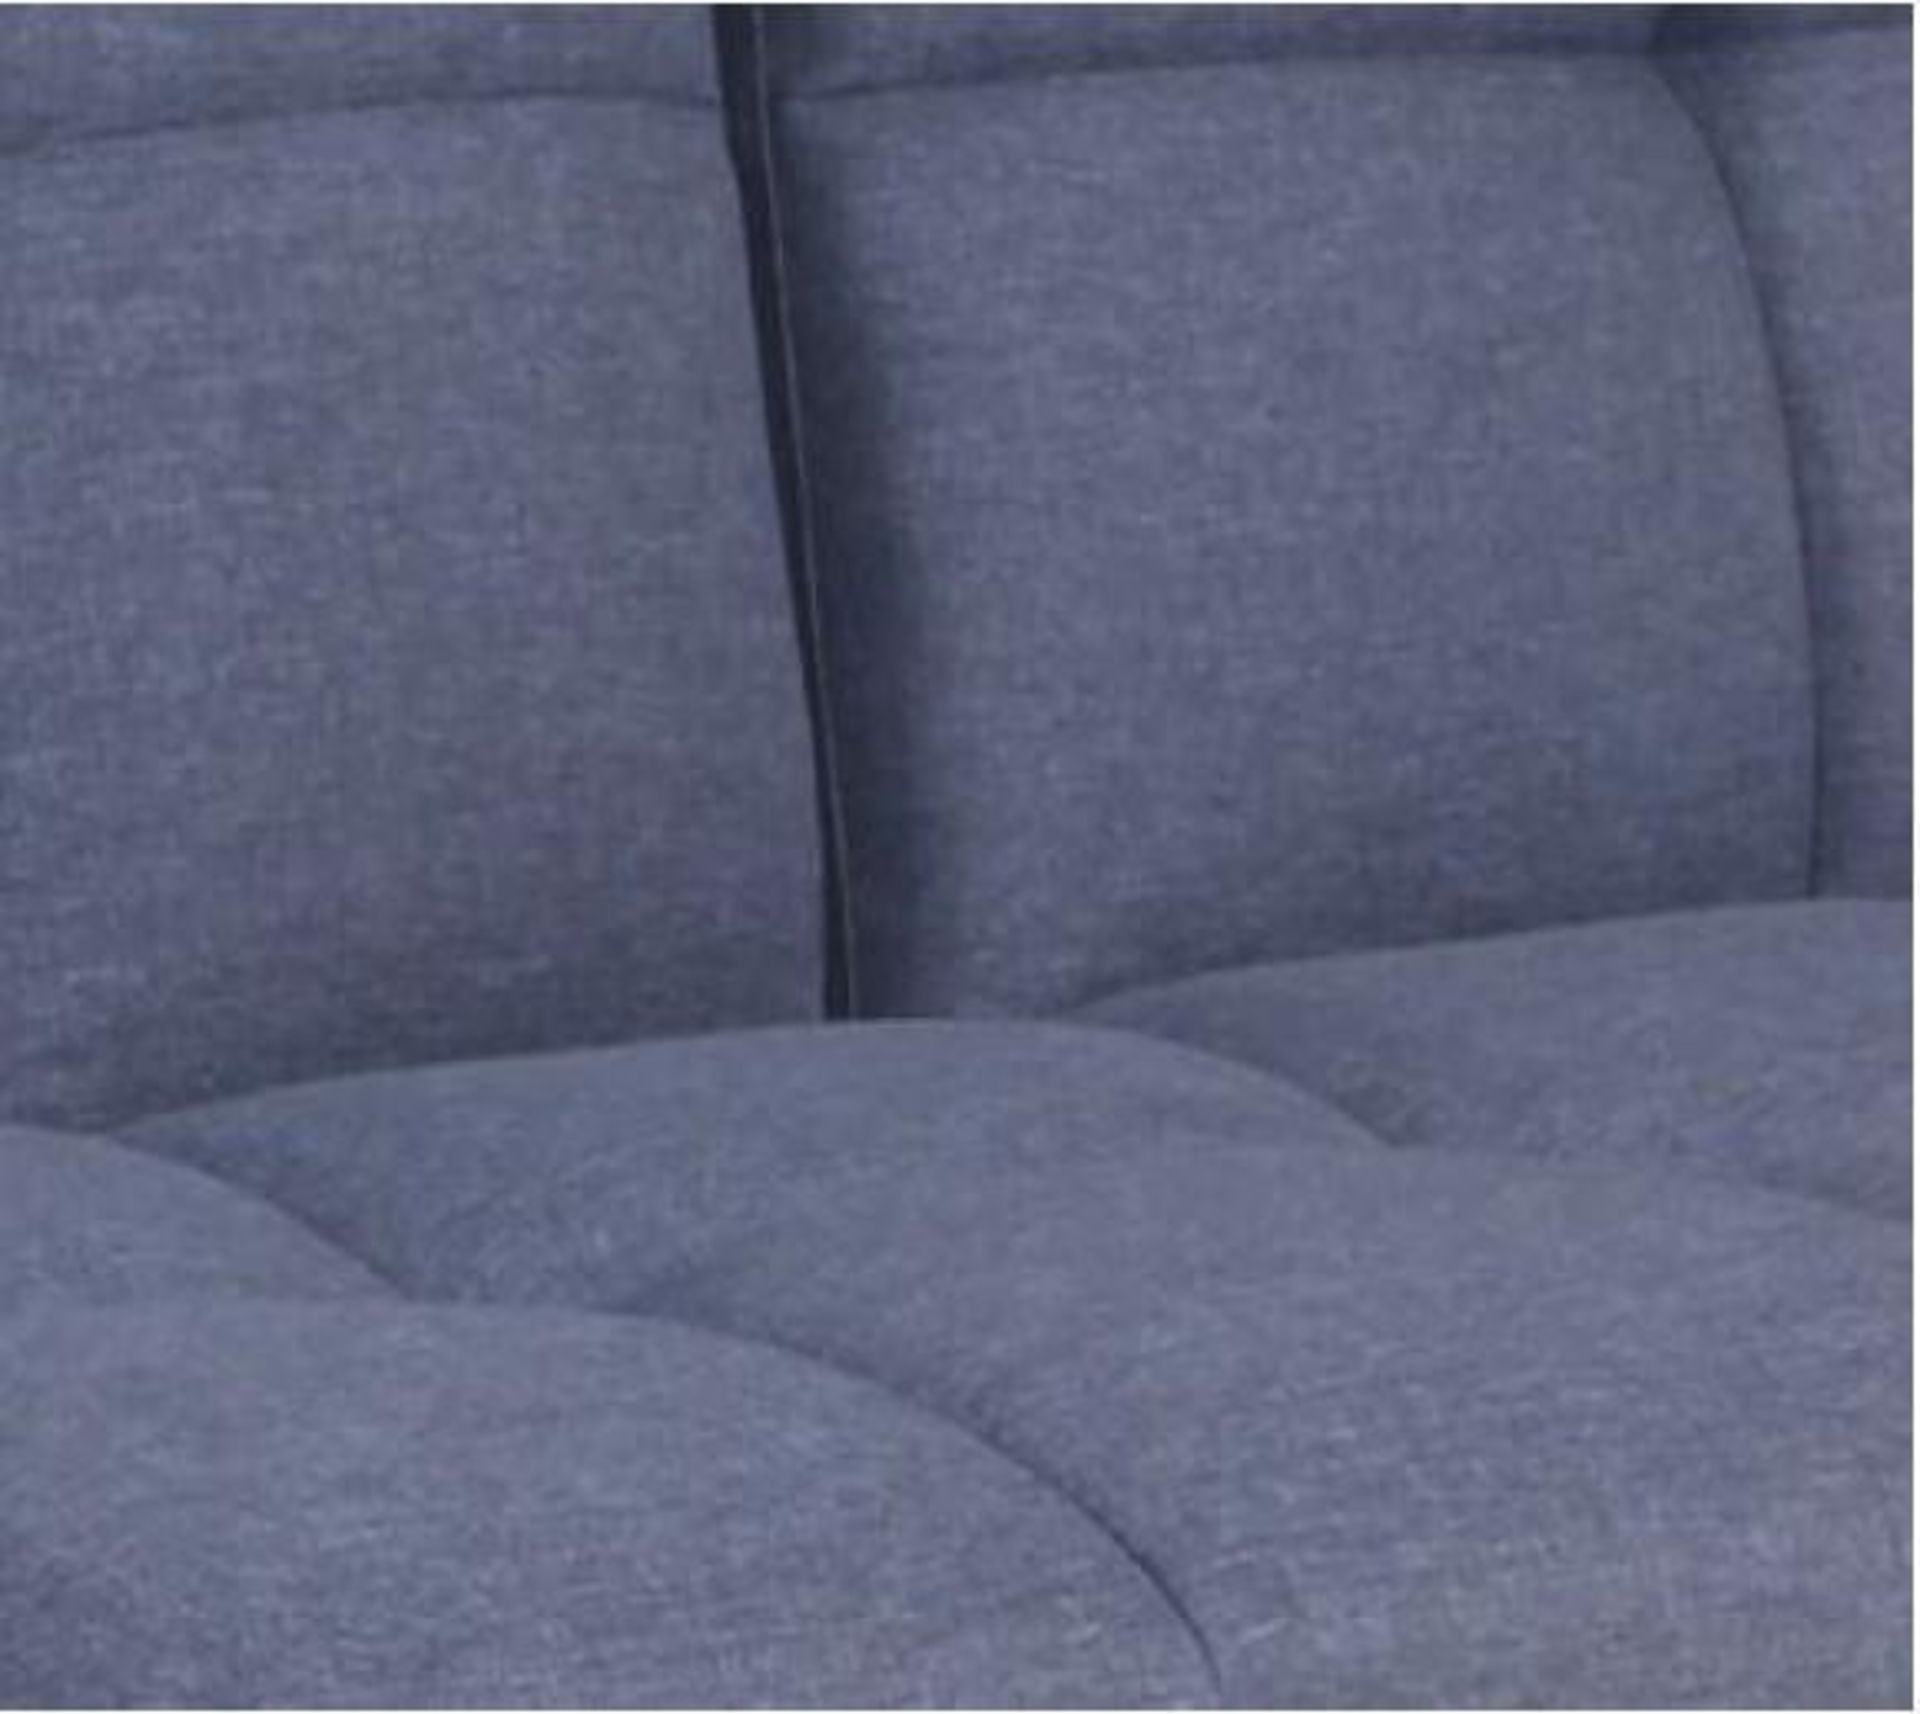 Brand new Boxed 2 Seater Clic Clac USB Sofa Bed - Image 8 of 10